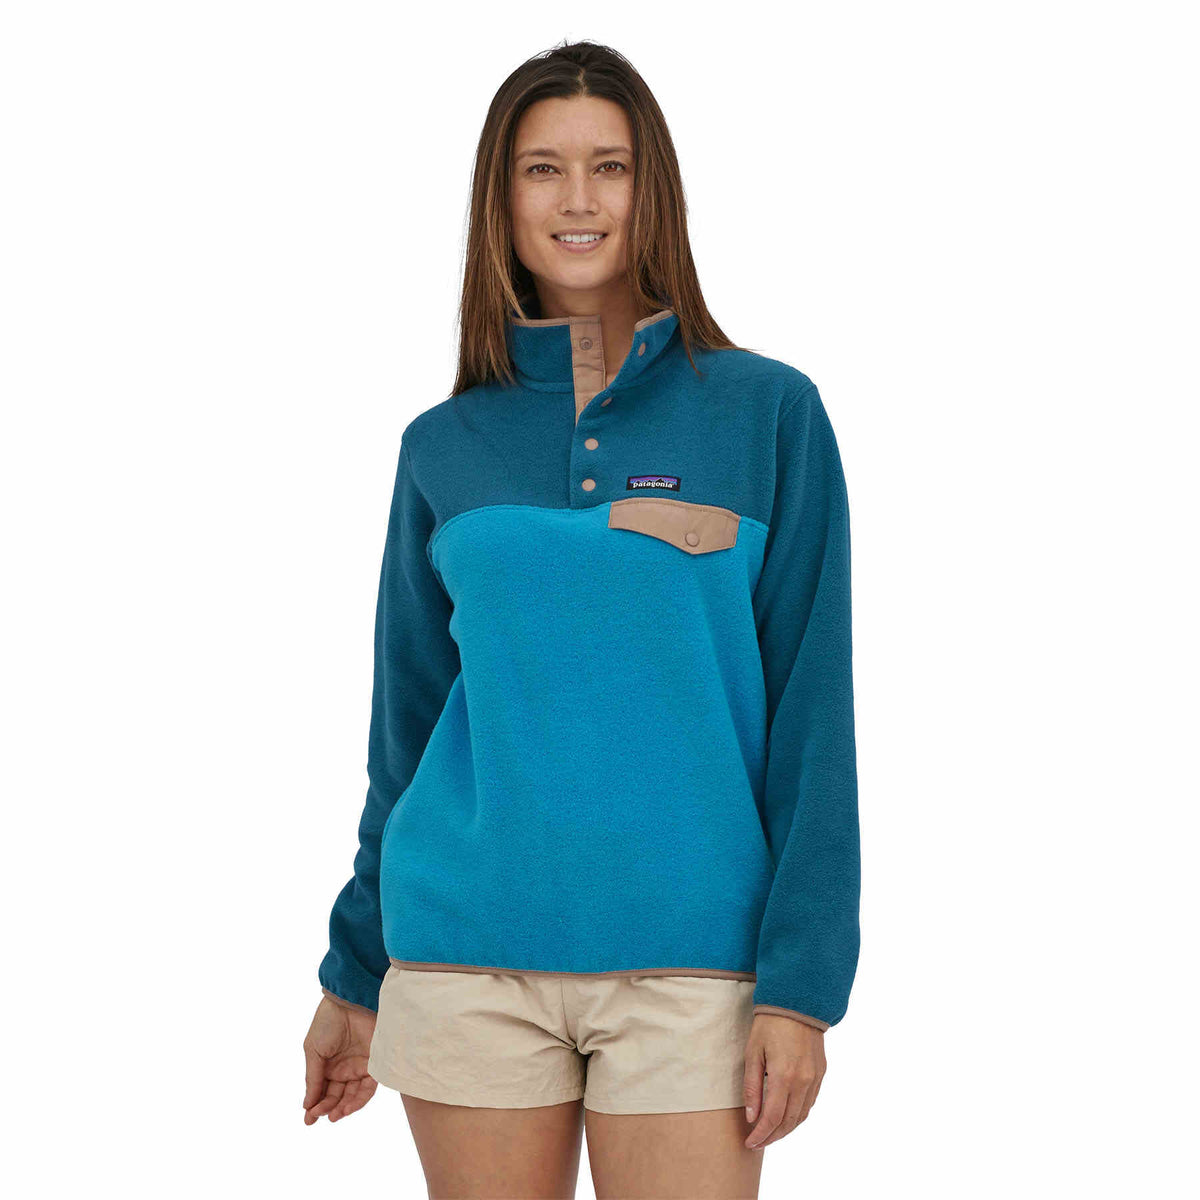 Chaqueta Impermeable Mujer Torrentshell 3L - Patagonia - Preppy Beach